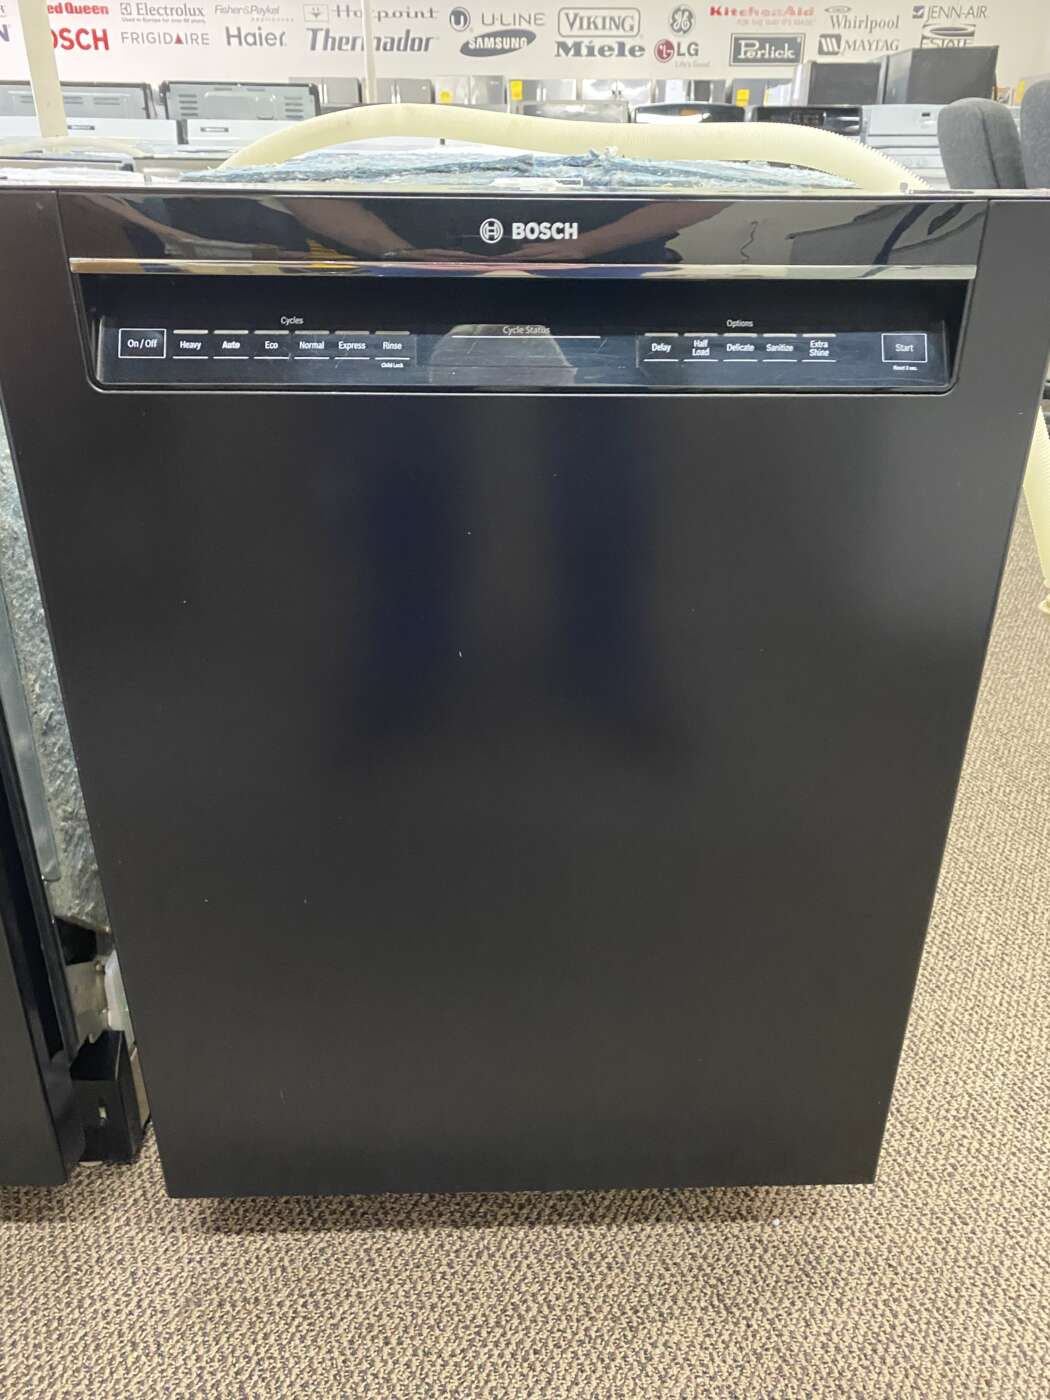 Reconditioned BOSCH Stainless-Tub Built-In Dishwasher With 3-Racks – Black